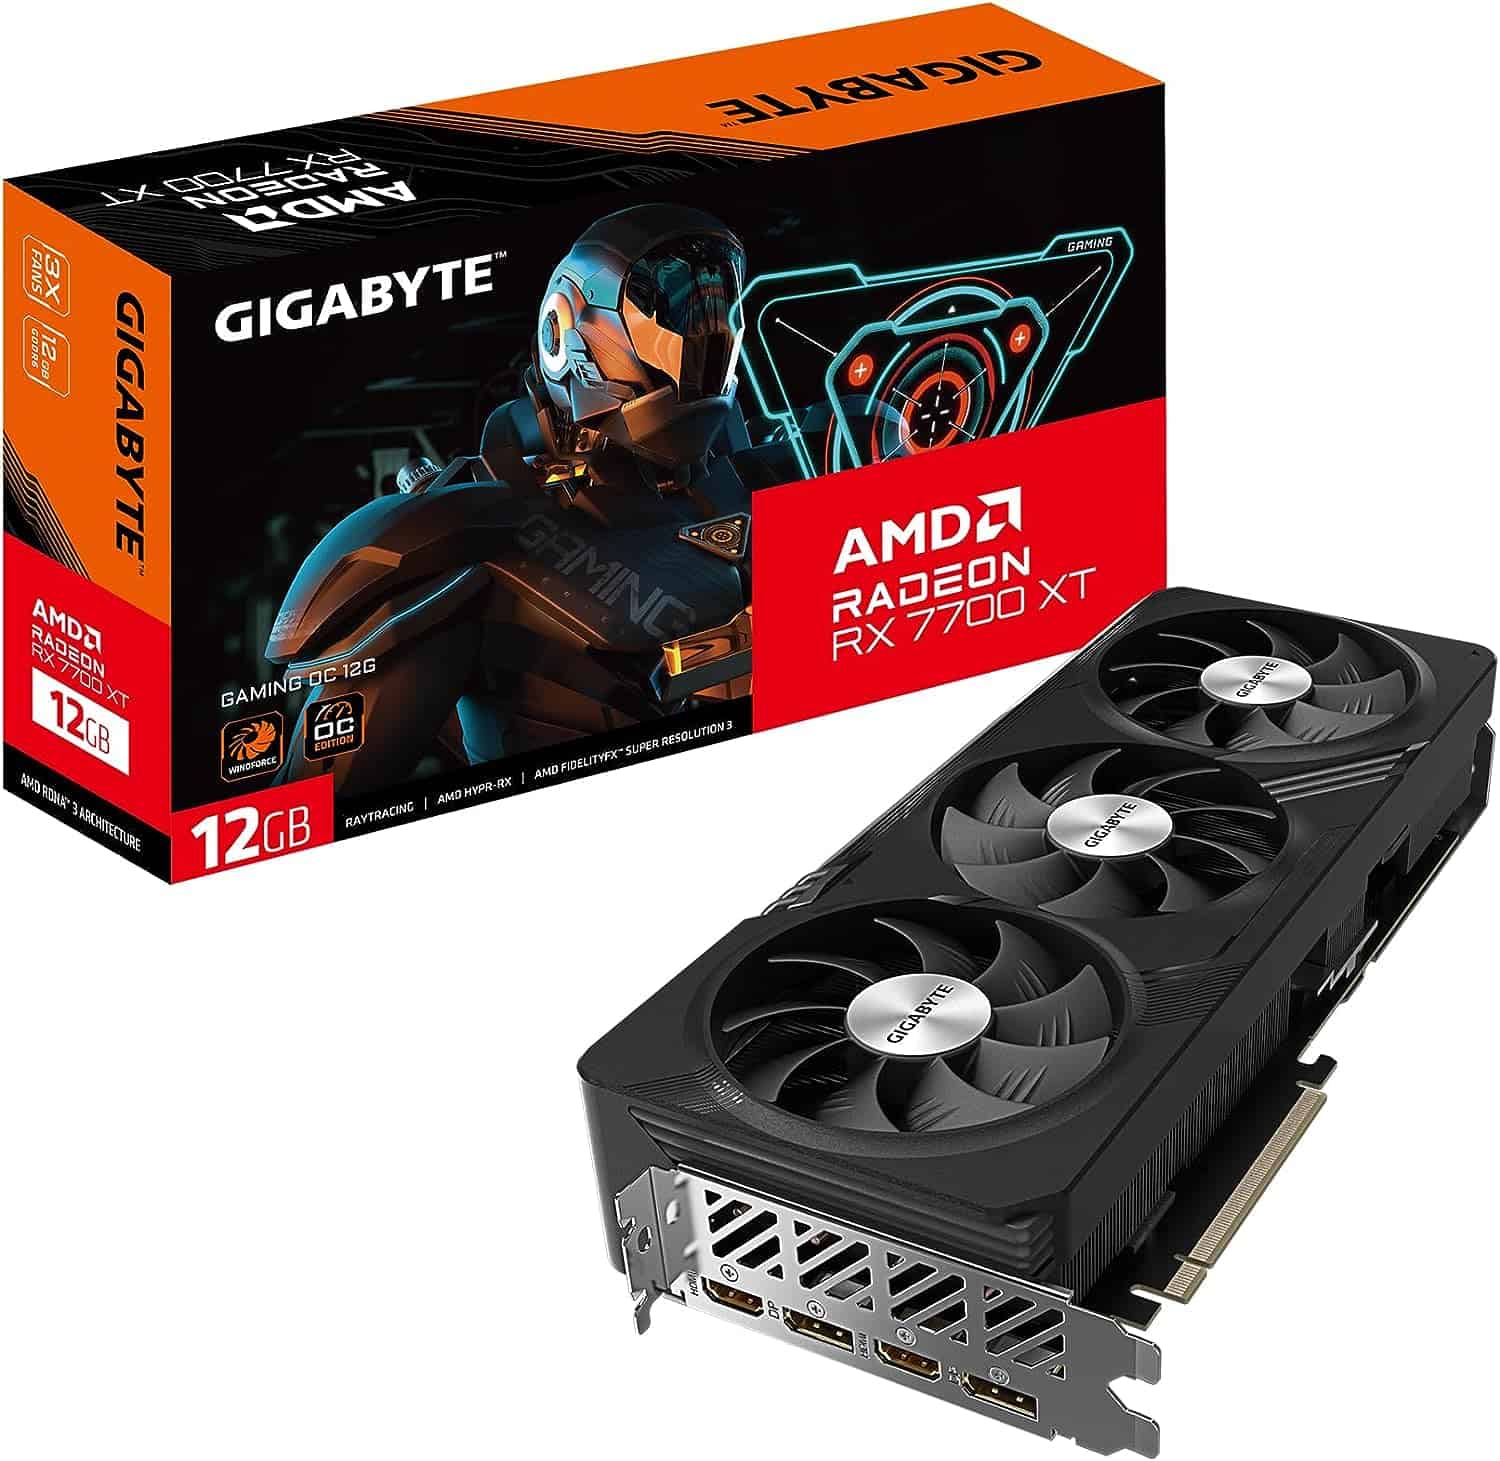 Gigabyte Radeon RX 7700 XT Gaming OC graphics card with three fans, displayed alongside its packaging box.